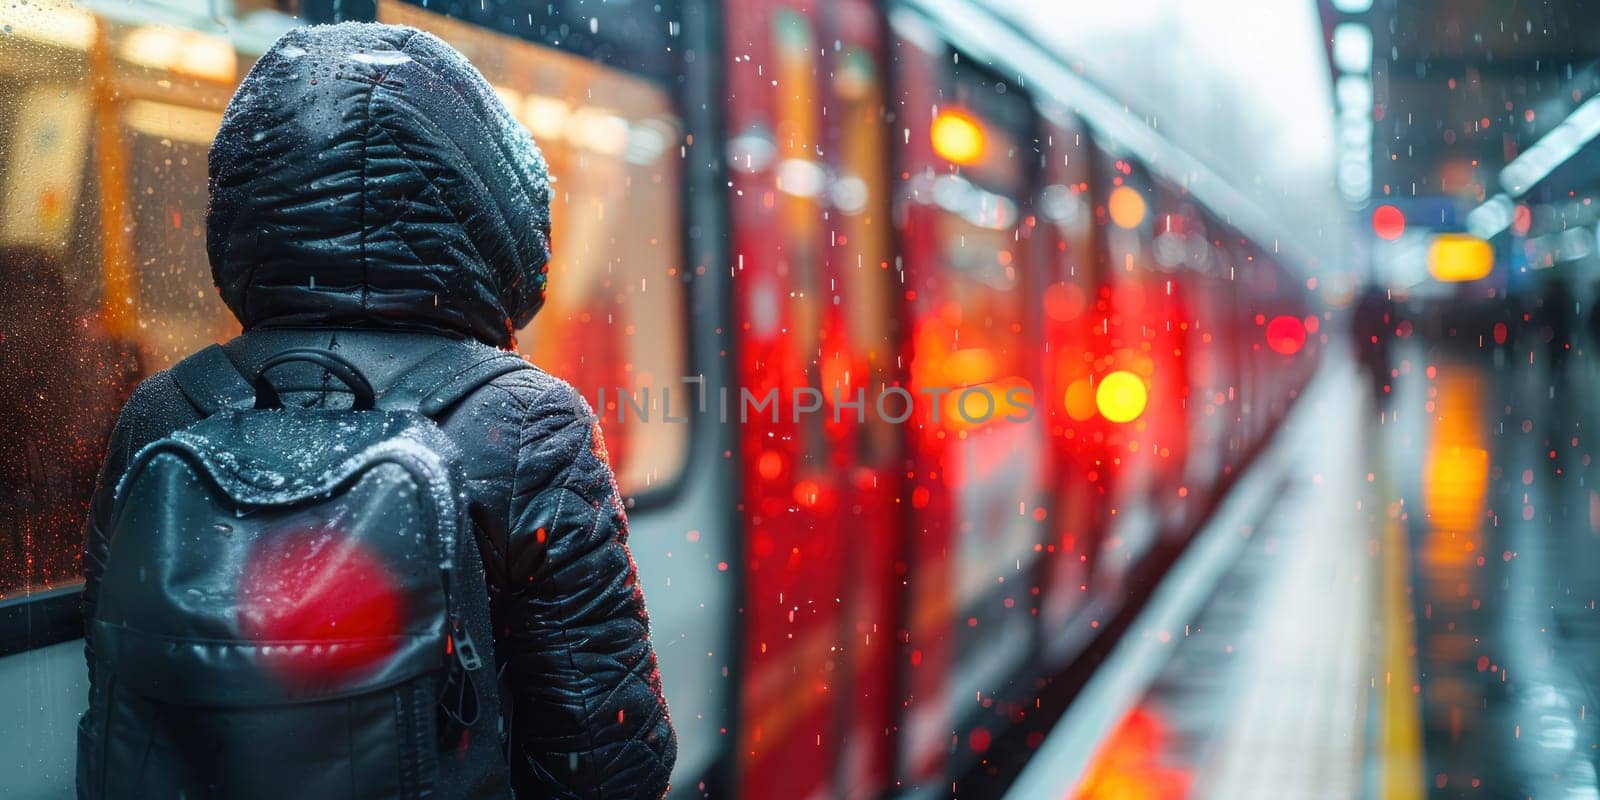 A red train with its doors open and a person walking in the rain by golfmerrymaker